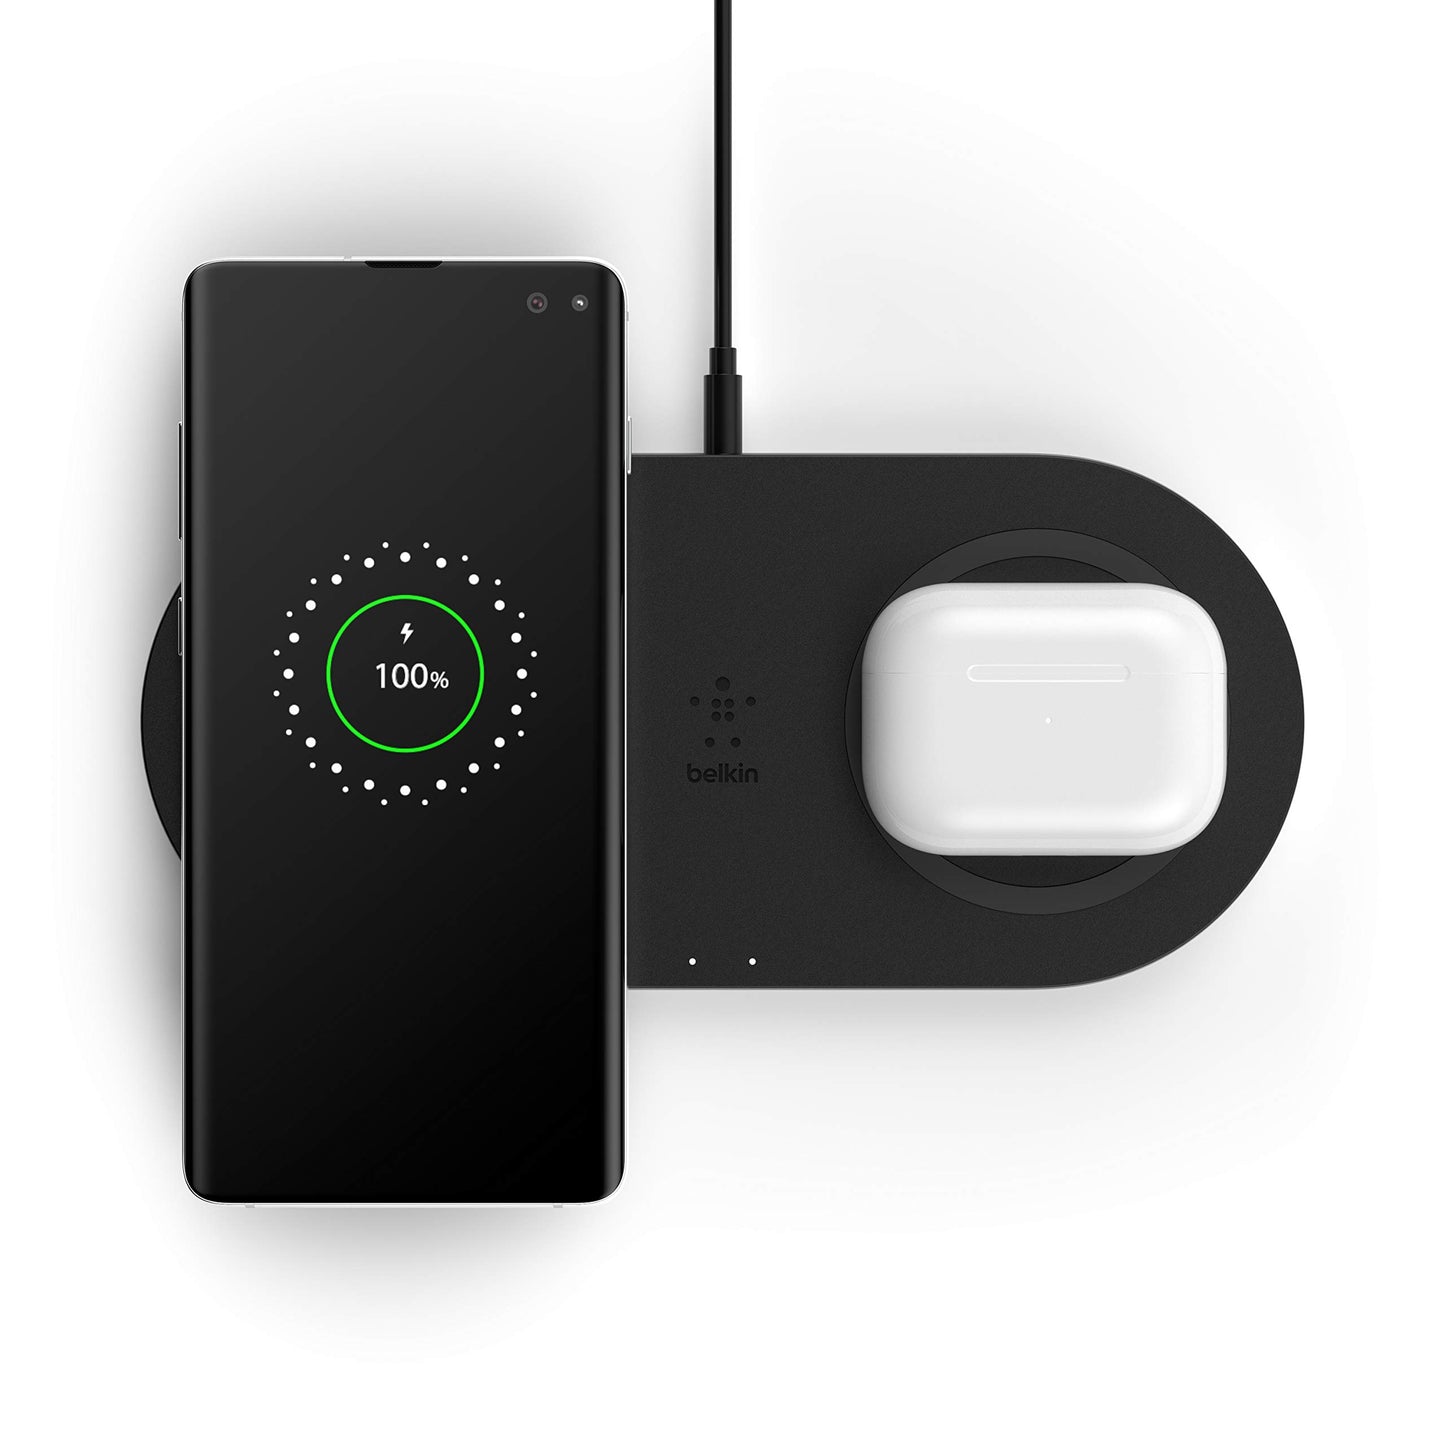 Belkin Quick Charge Dual Wireless Charging Pad - 10W Qi-Certified Charger Pad for iPhone, Samsung, Apple Airpods & More - Charge While Listening to Music, Streaming Videos, & Video Calls - Black